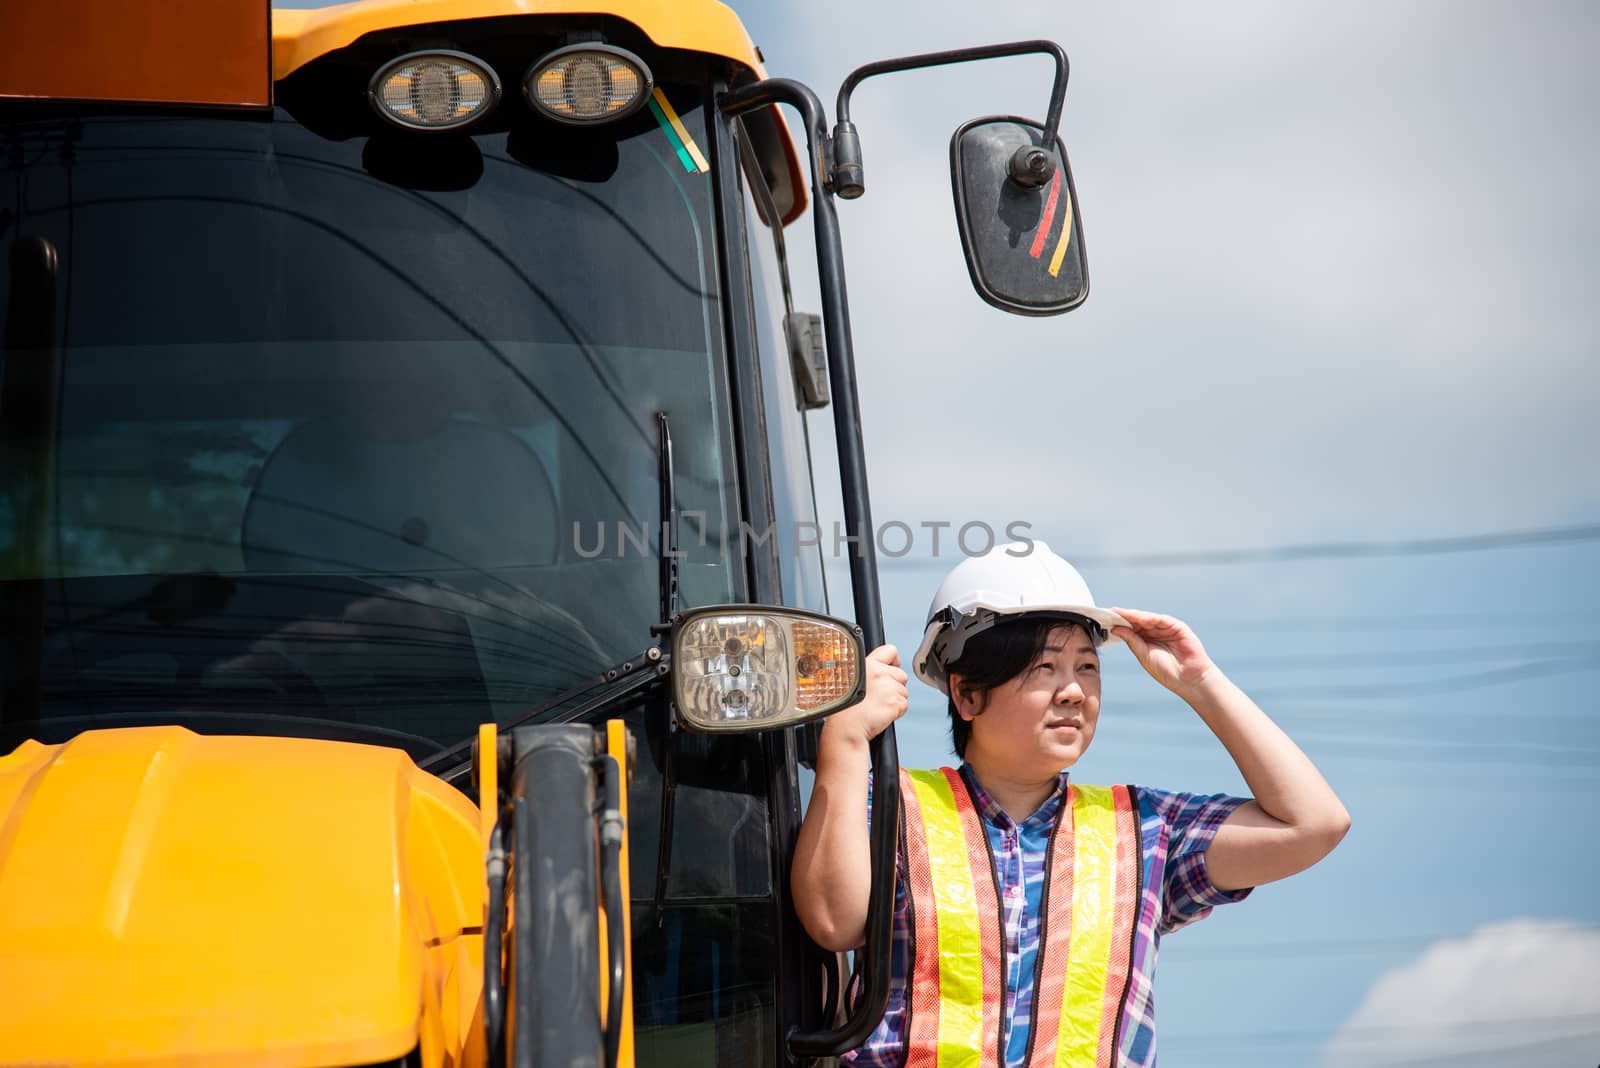 Asian woman civil construction engineer worker or architect with helmet and safety vest happy working and loader backhoe at a building or construction site